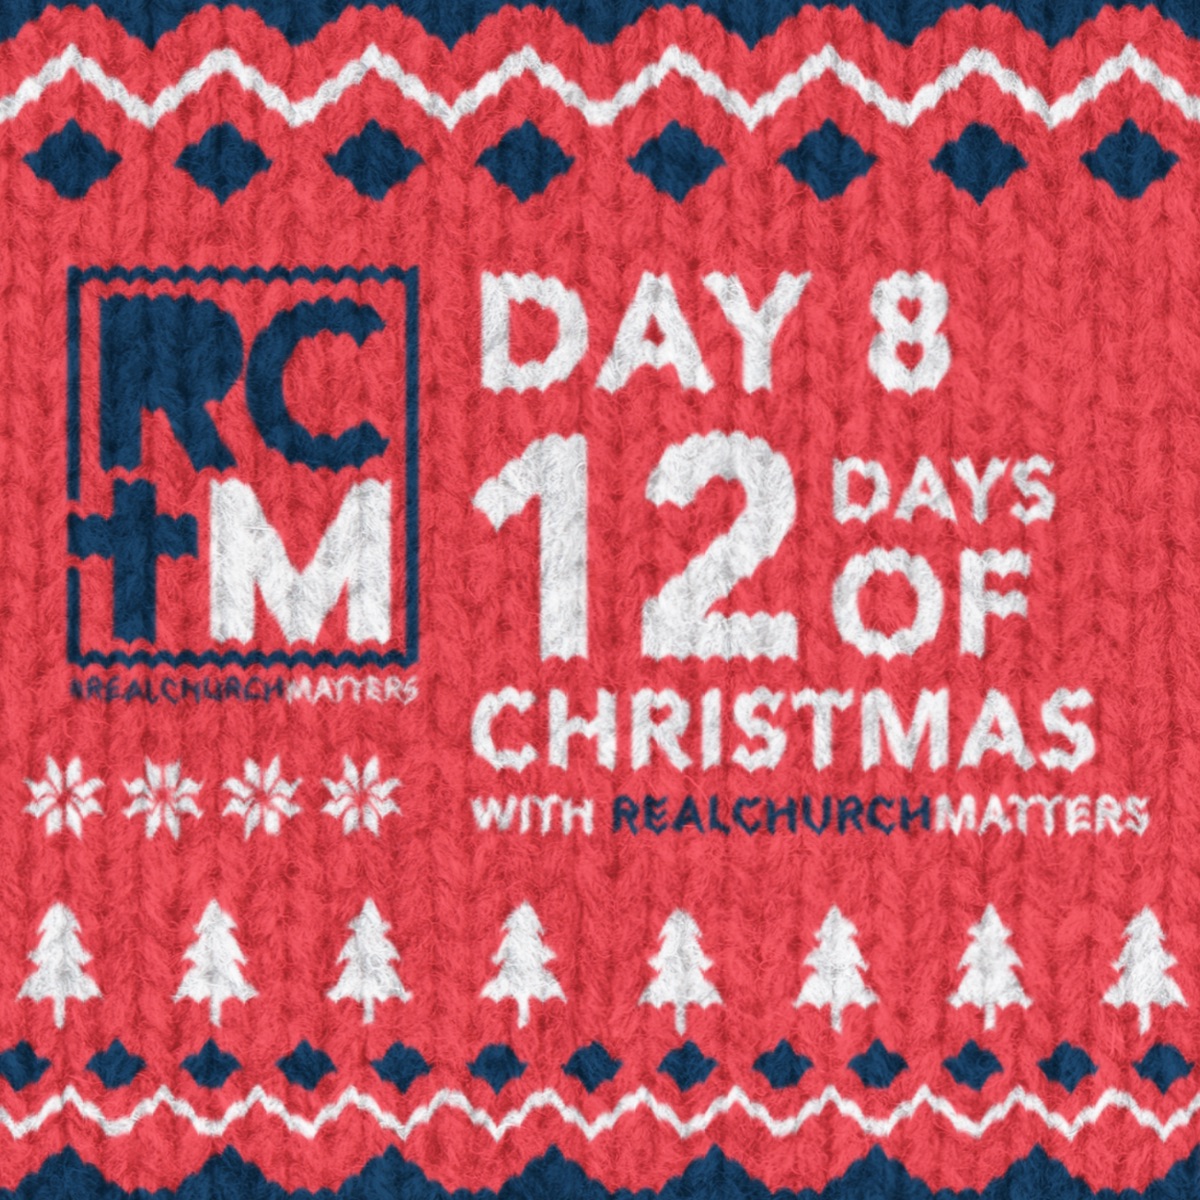 Day 8 of the 12 Days of Christmas with Real Church Matters